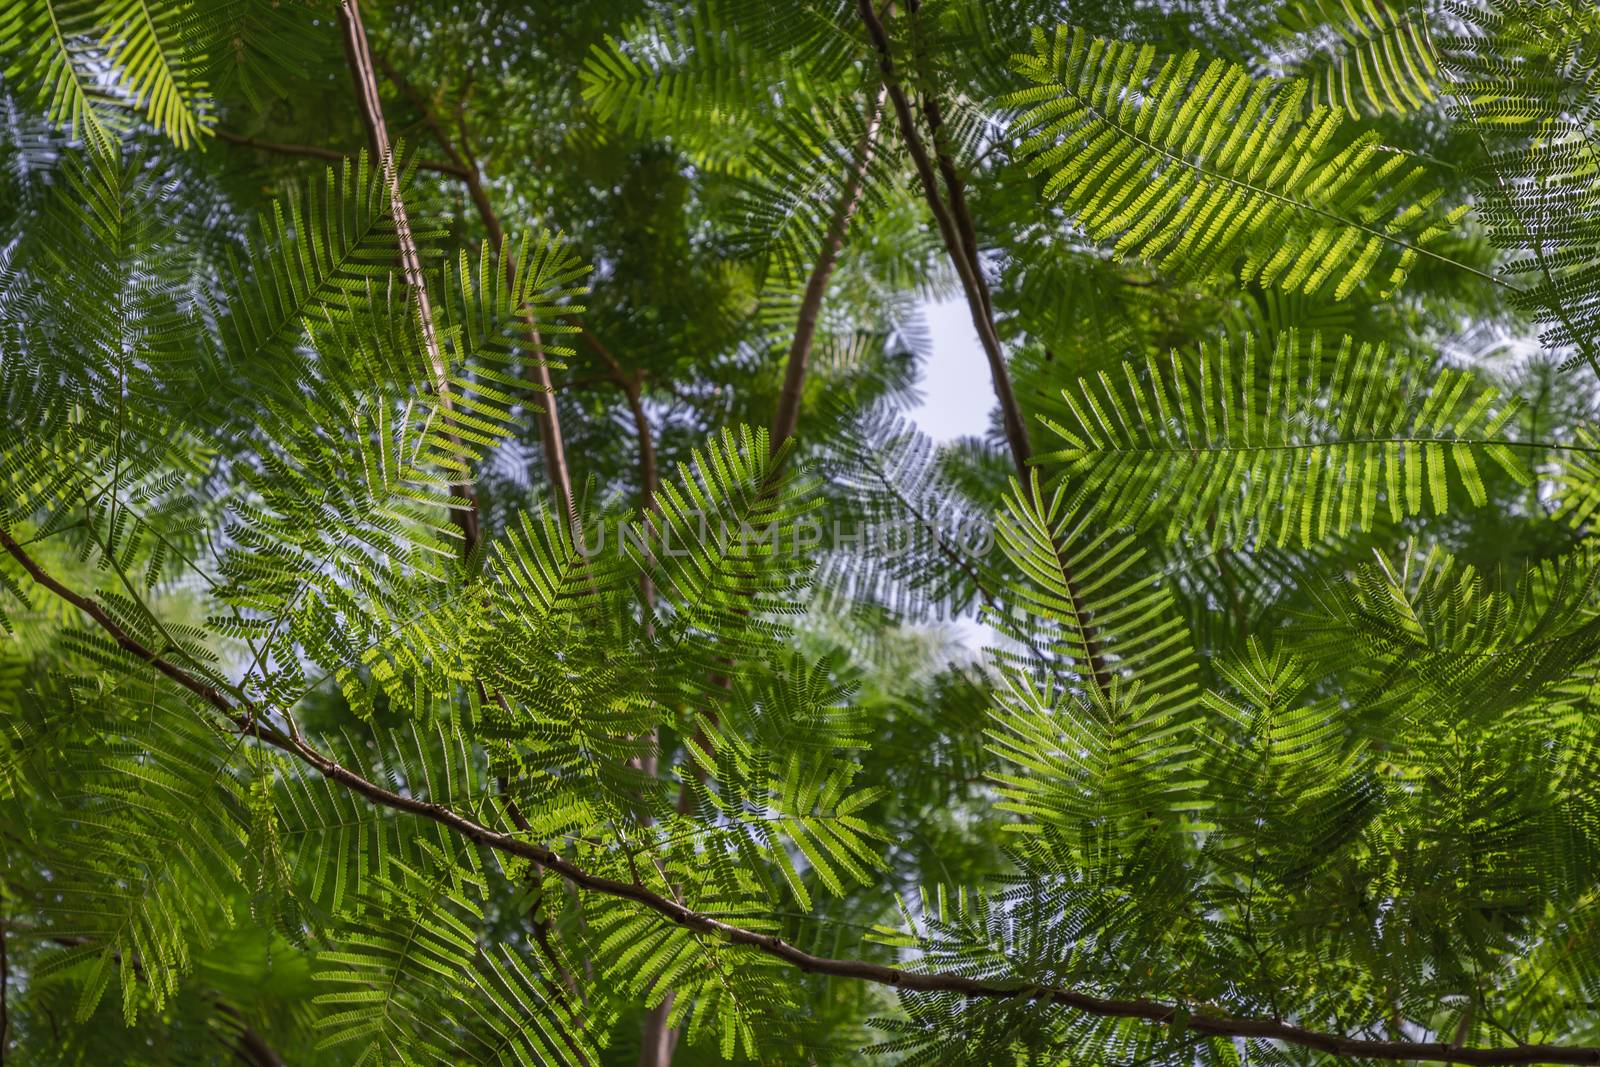 Detail of sunlight passing through small green leaves of Persian silk tree (Albizia julibrissin) on blurred greenery of garden. Atmosphere of calm relaxation. Nature concept for design. No focus, specifically.